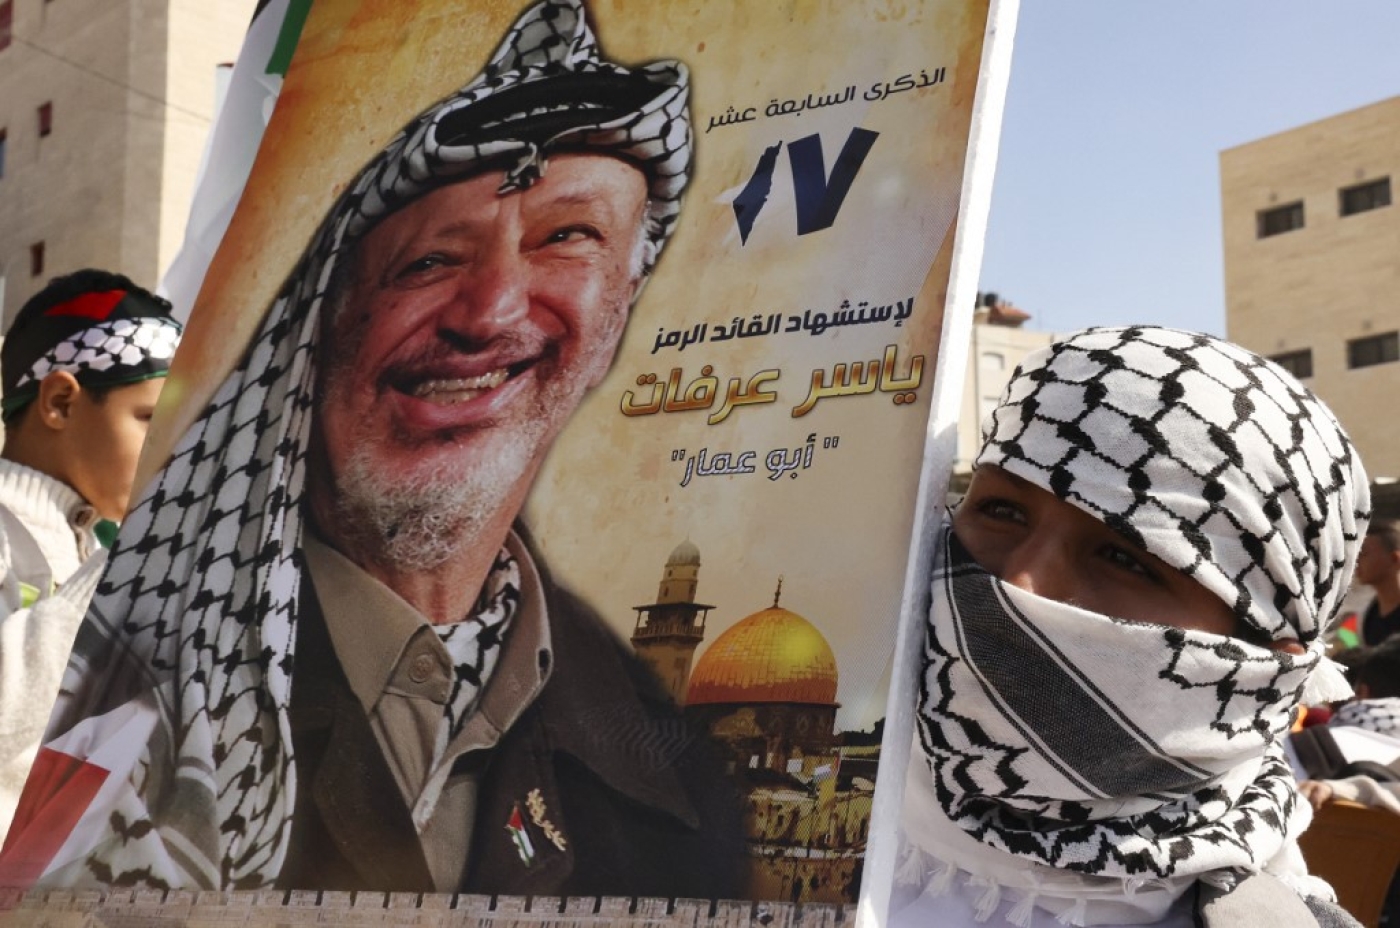 Palestinian supporters of the Fath movement raise a poster of the late leader Yasser Arafat during a rally marking the 17th anniversary of his passing, in the village of Halhul, north the West Bank town of Hebron, on 11 November 2021 (AFP)